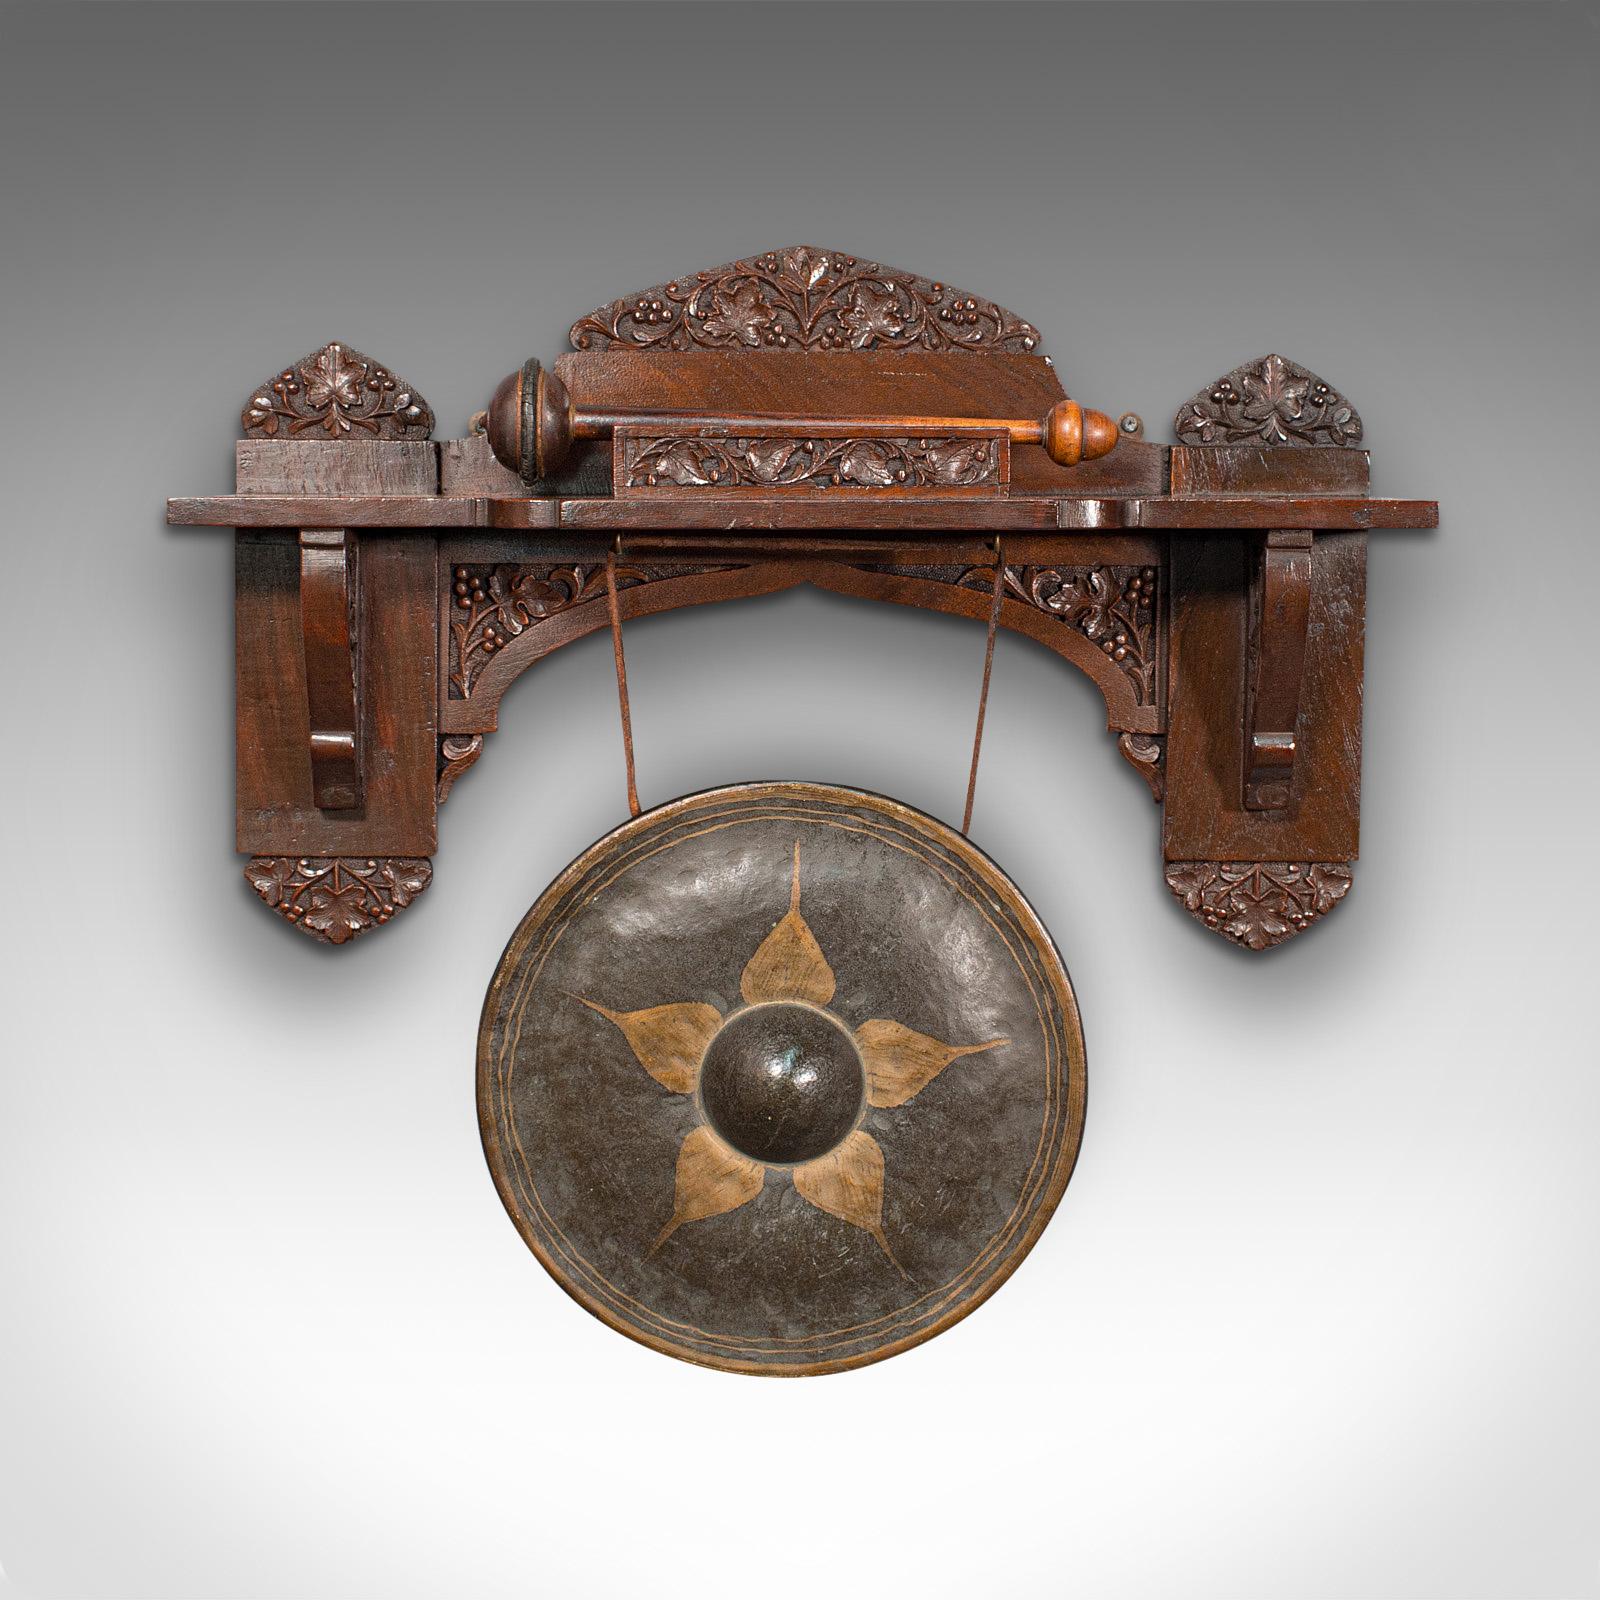 This is an antique wall gong. An Indian, oak and brass dinner or ceremonial monastery chime, dating to the late 19th century, circa 1900.

Fascinating ceremonial gong with pleasing timbre
Displays a desirable aged patina and in good order
Select